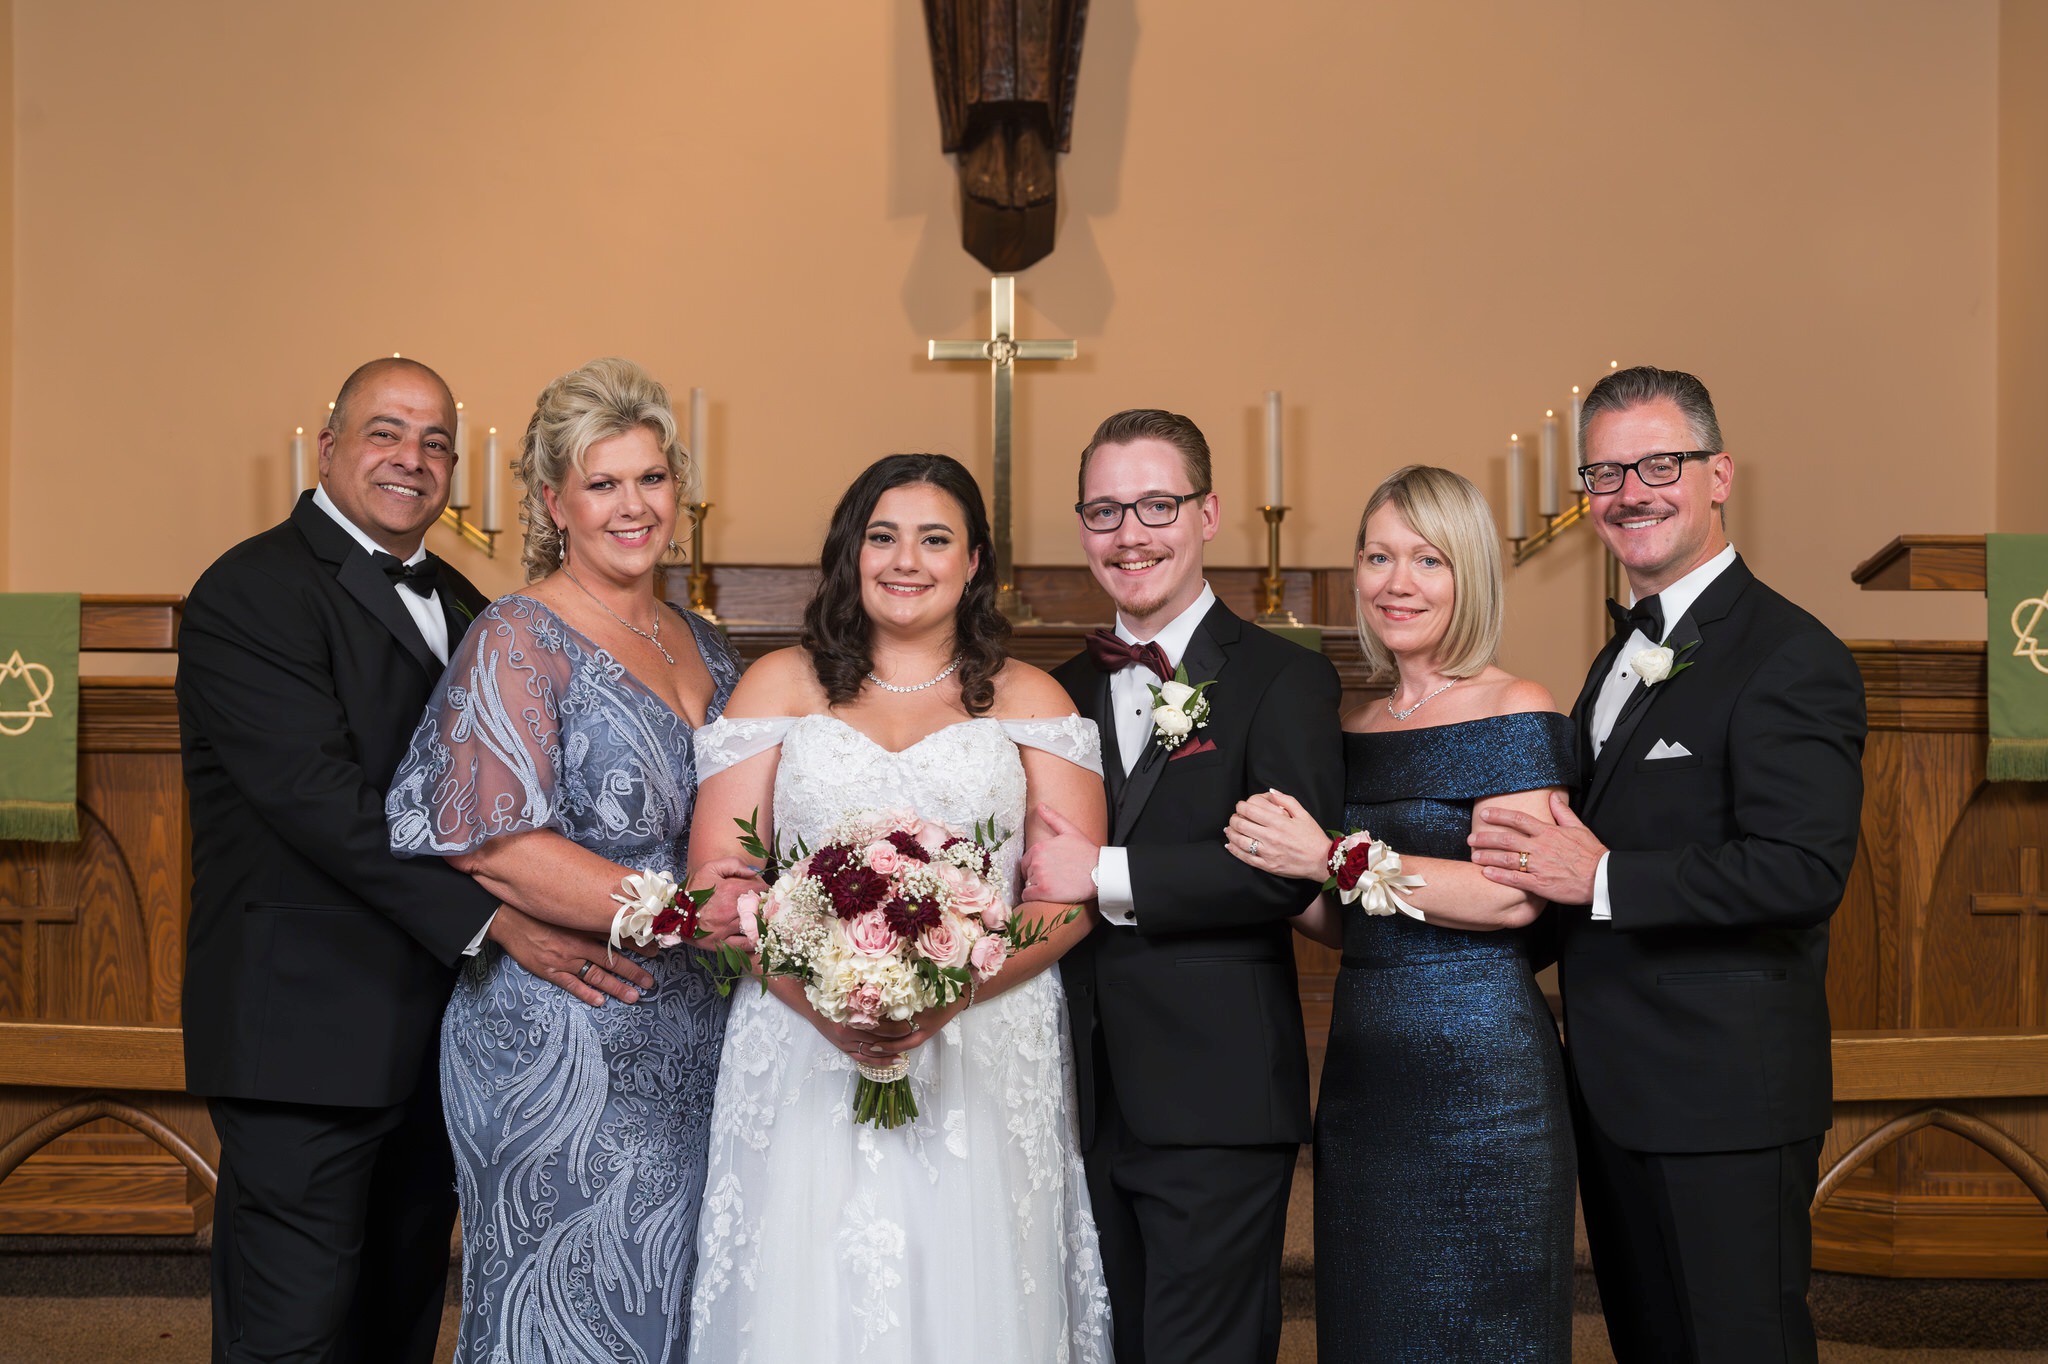 A family portrait on a wedding day at Immanuel Lutheran Church in Macomb, MI. 